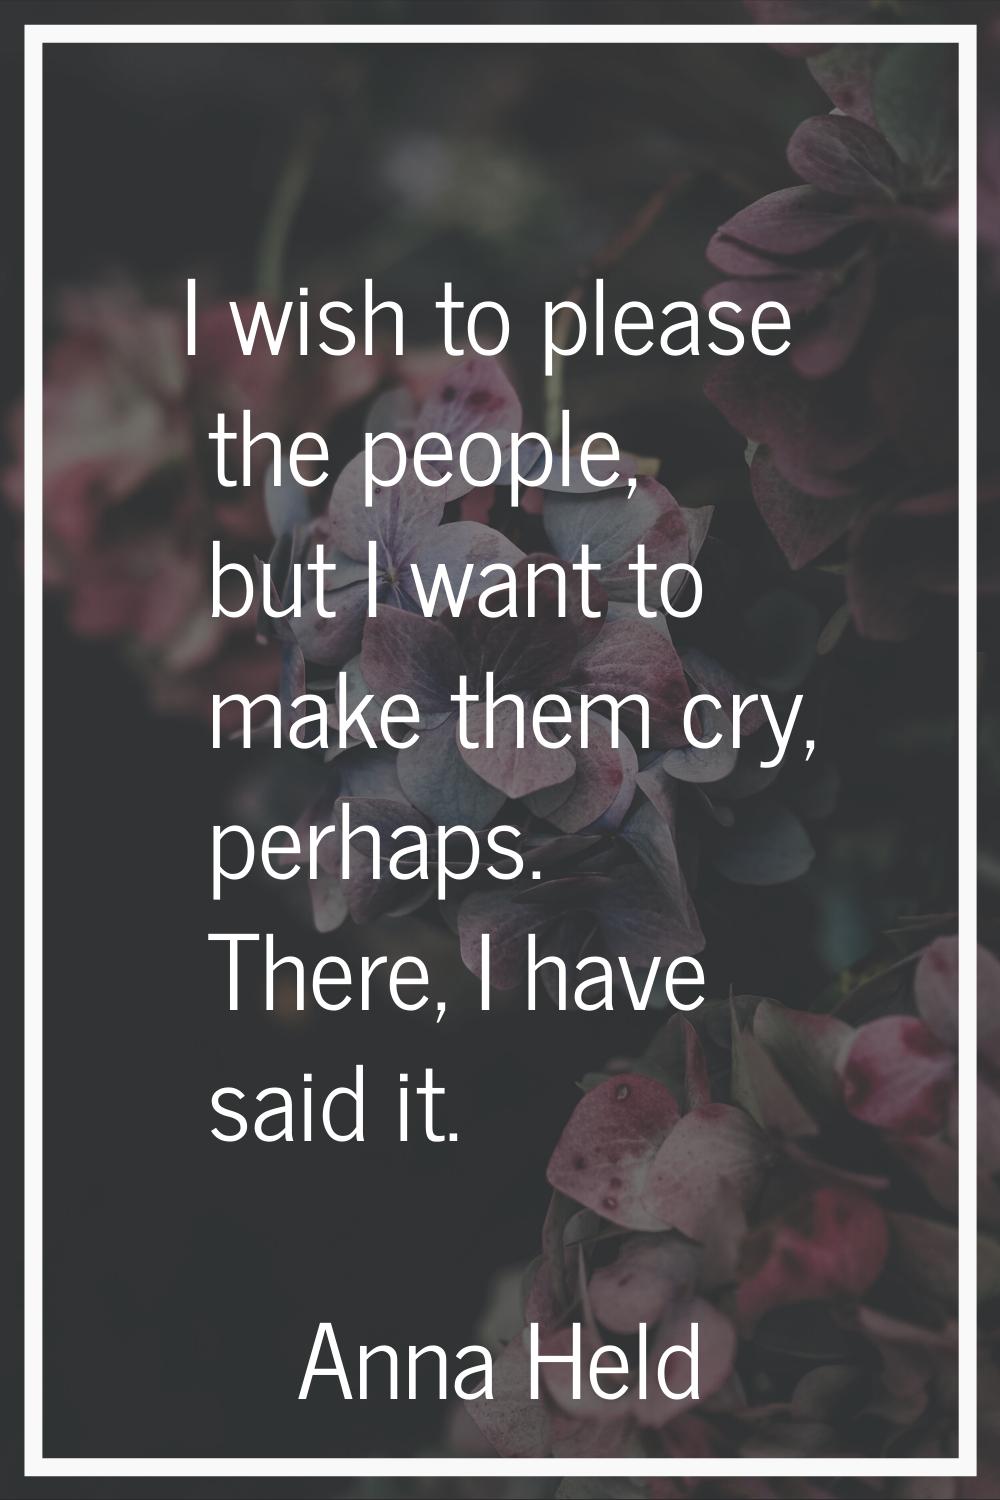 I wish to please the people, but I want to make them cry, perhaps. There, I have said it.